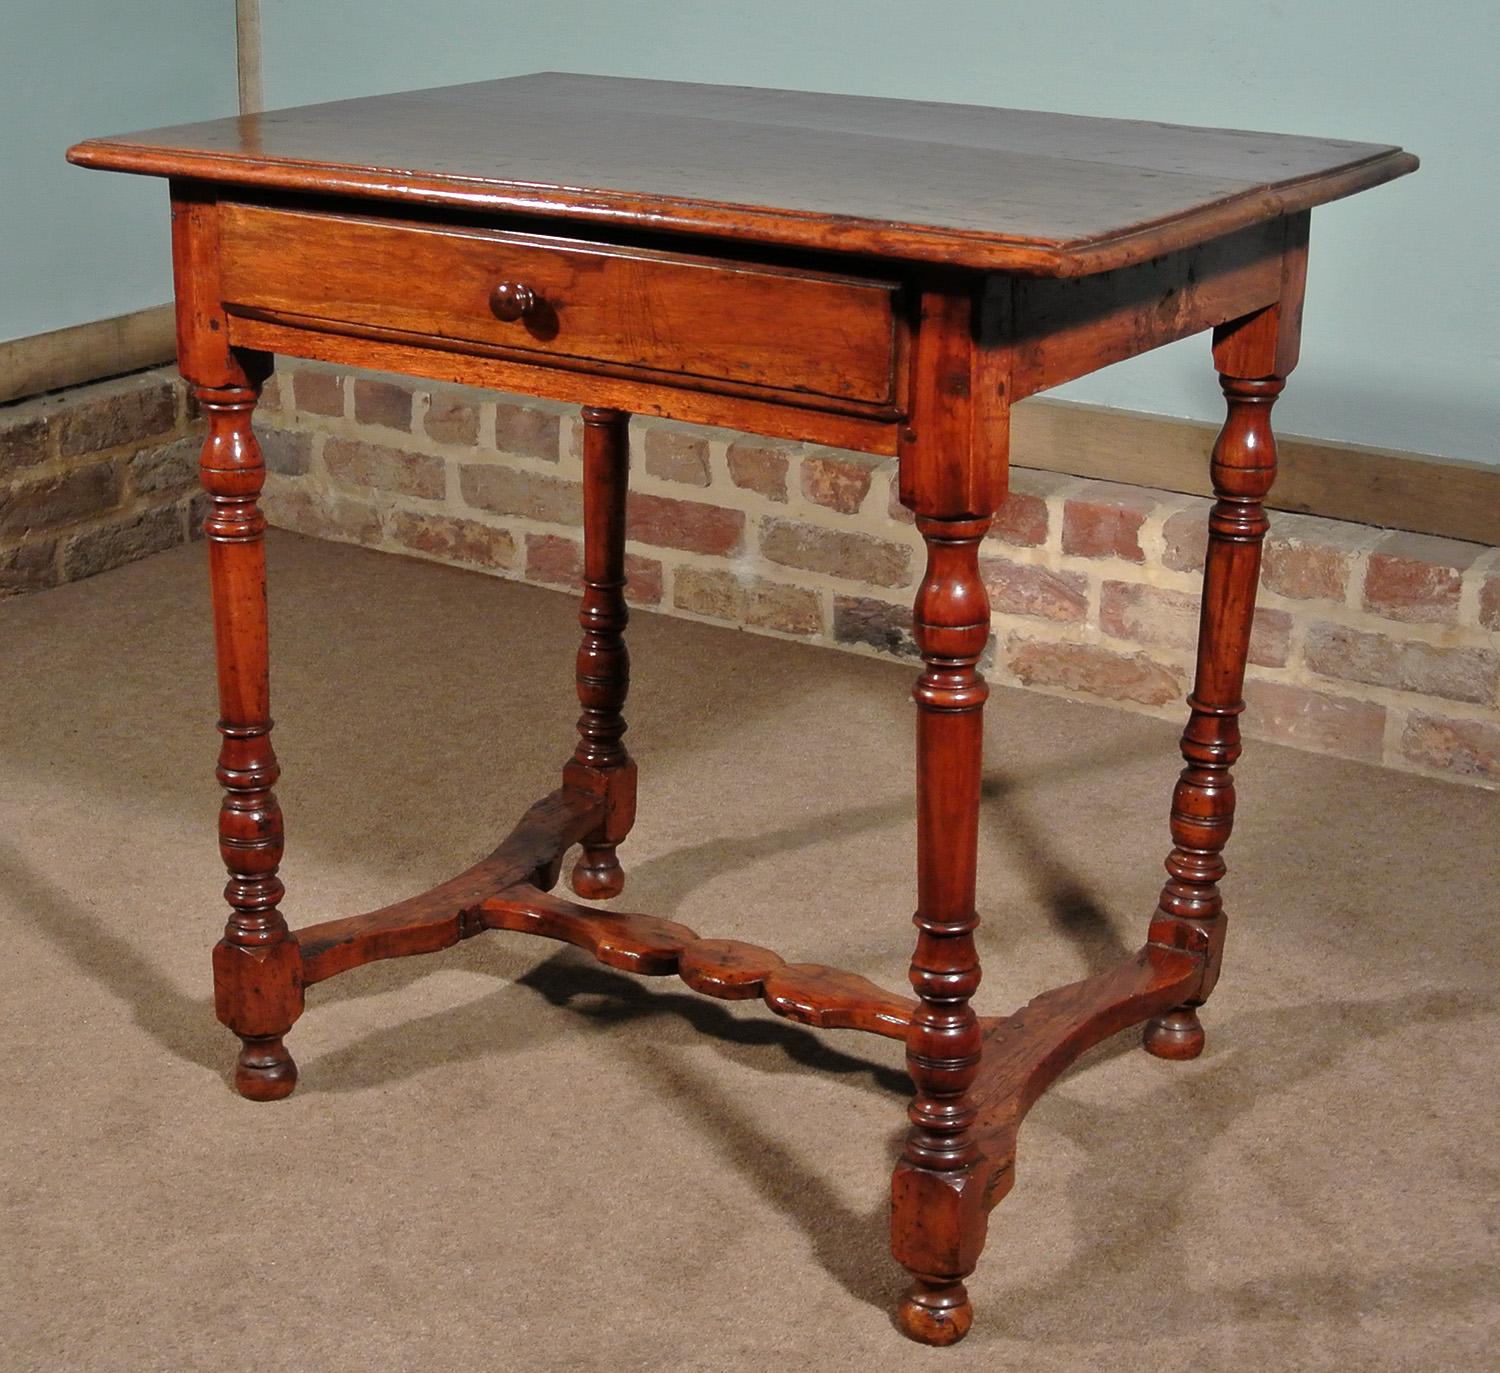 Late 17th Century Solid Walnut Tavern Table In Good Condition For Sale In Dallington, East Sussex